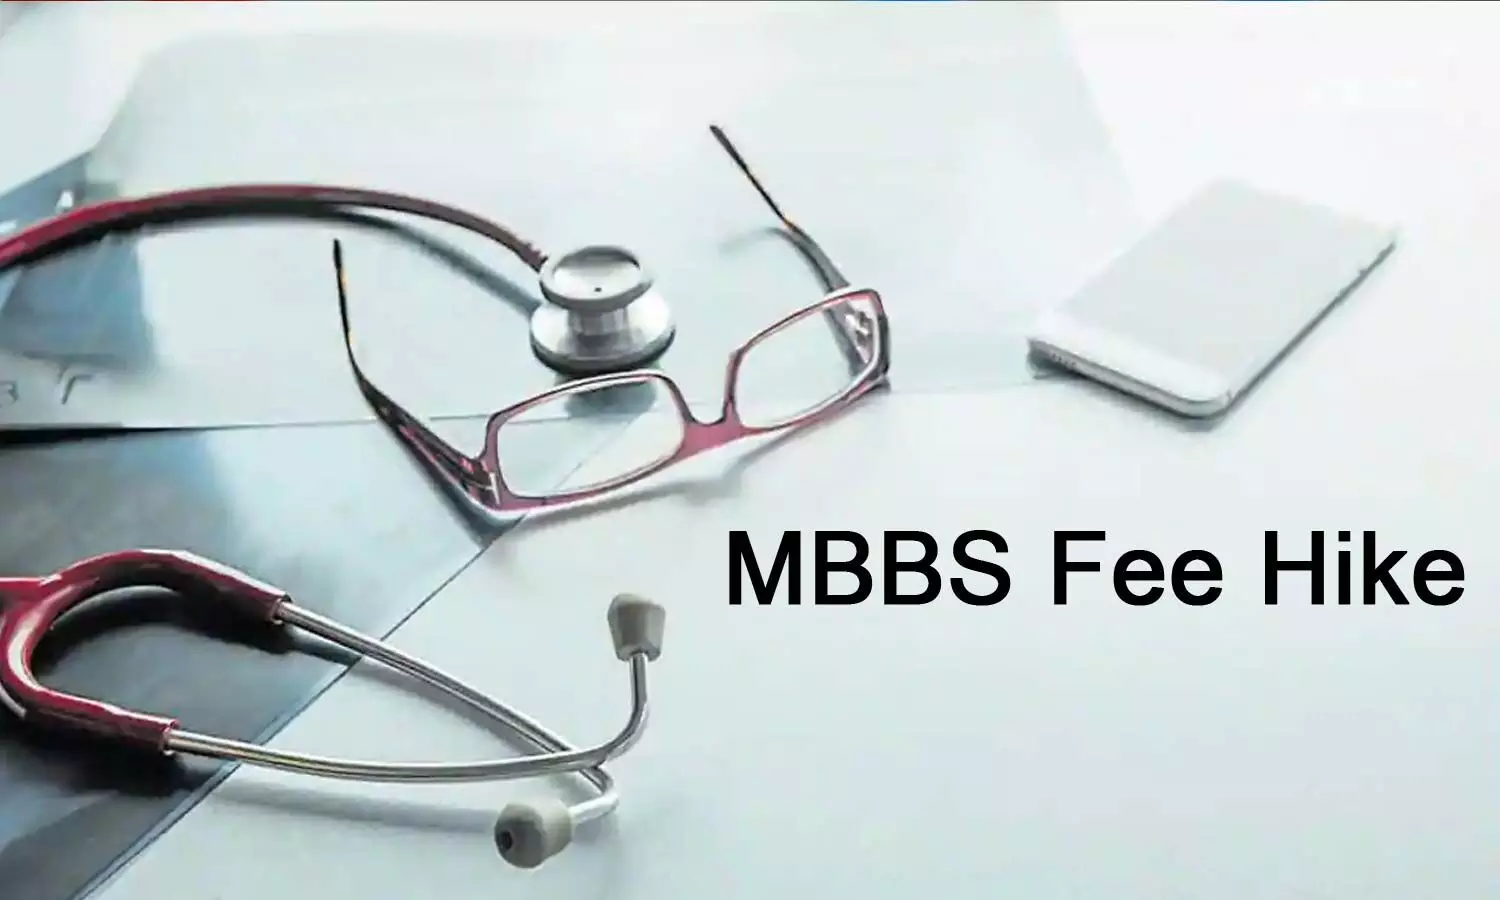 MBBS, BDS fee hiked for private medical colleges in Karnataka, medicos cry foul